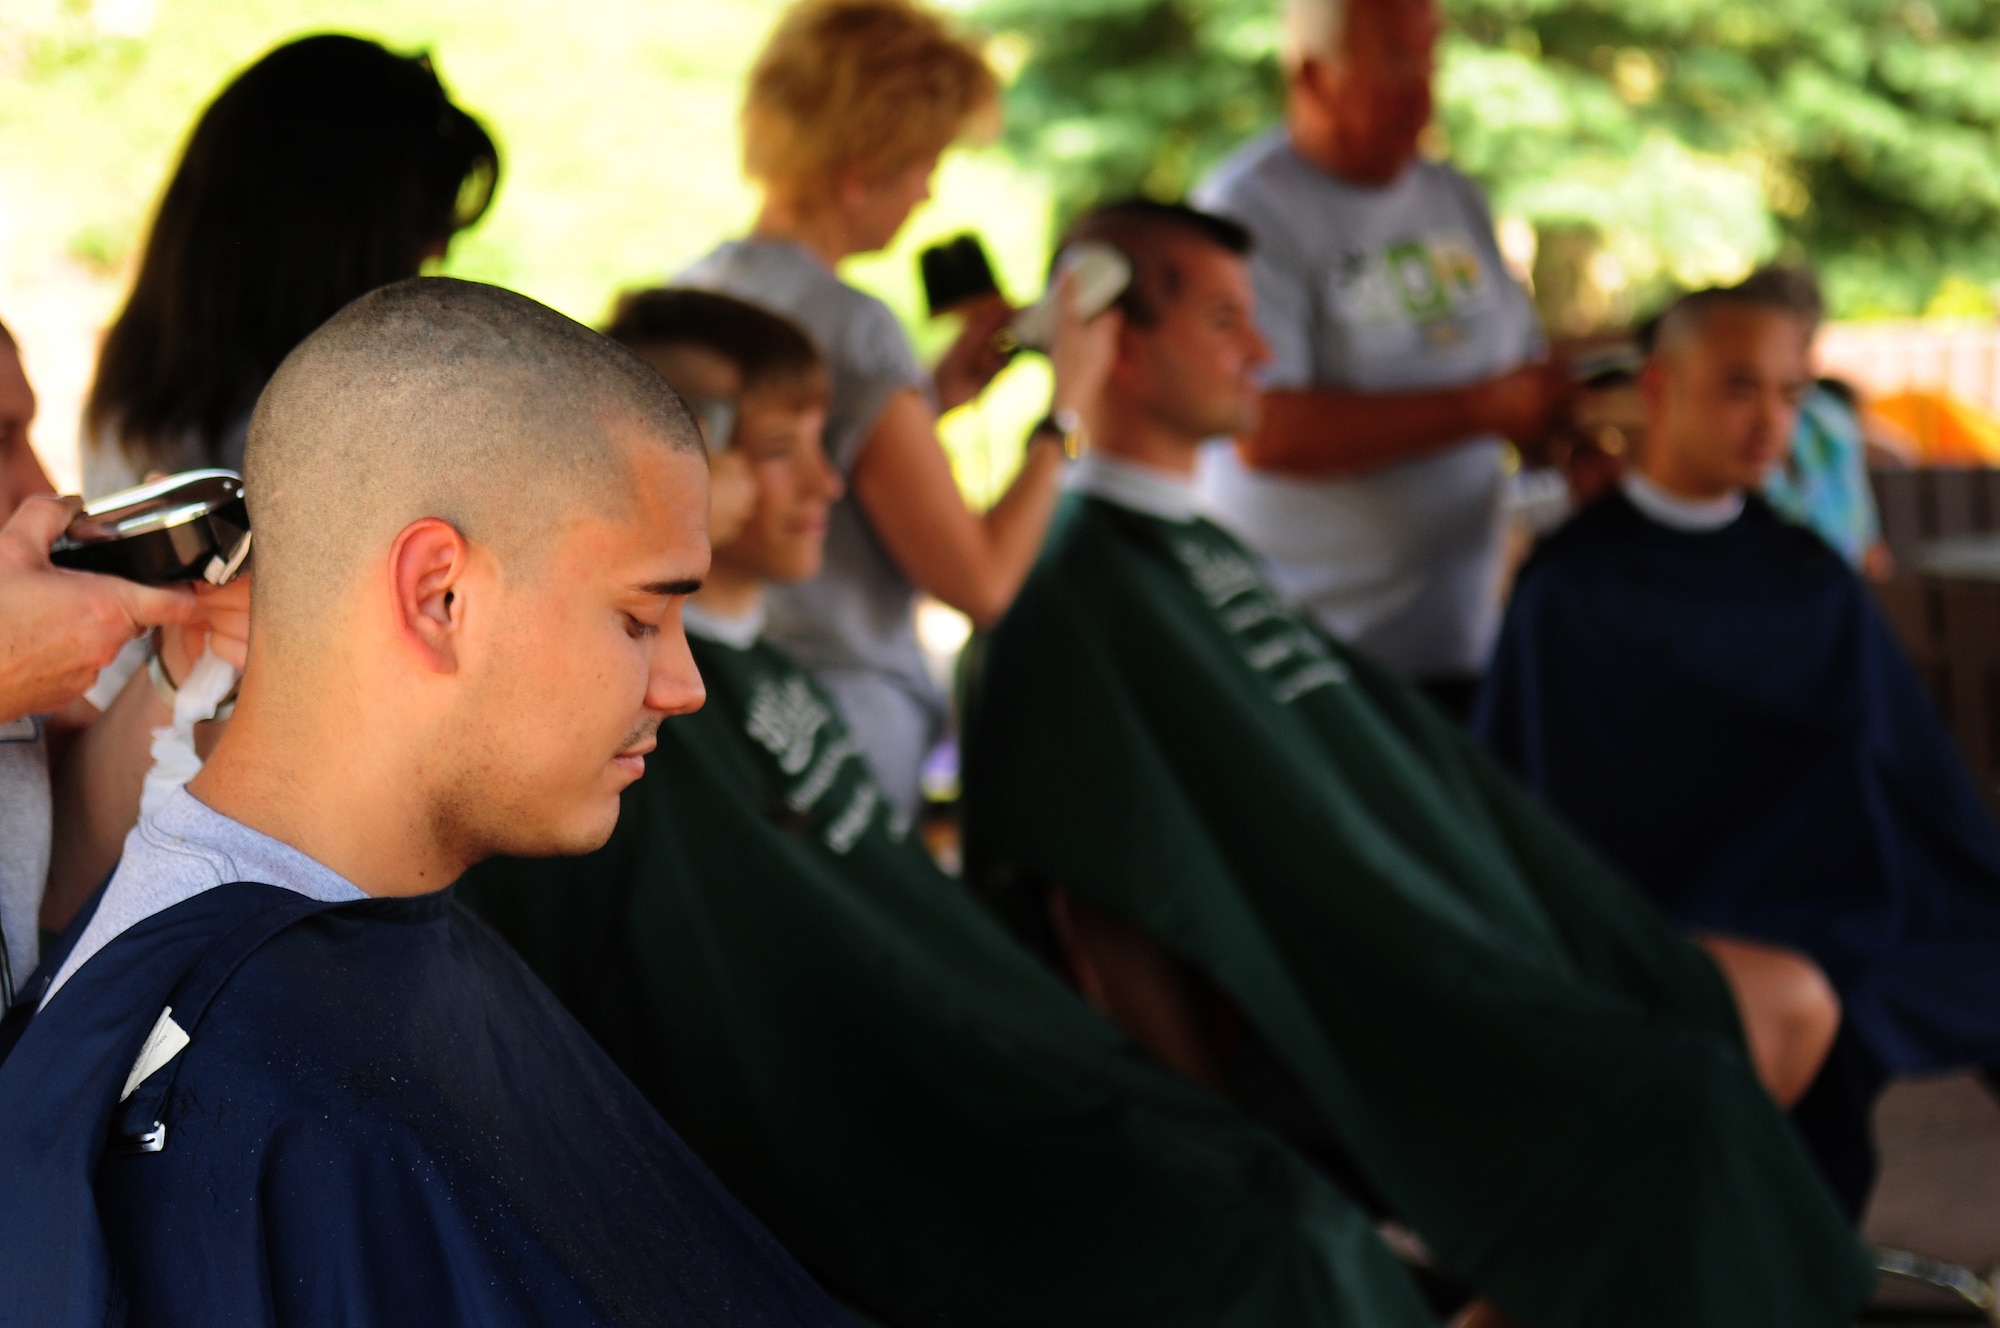 U.S. Air Force Senior Airman Miguel Mascorro, 86th Maintenance Squadron, has his head shaved as he participates in the first St. Baldrick's event held on Ramstein Air Base, Germany, June 26, 2010. The St. Baldrick's Foundation is an organization that tasks volunteers with getting sponsored to have their heads shaved as a demonstration of their camaraderie to children that have been diagnosed with cancer. (U.S. Air Force photo by Staff Sgt. Jocelyn Rich)